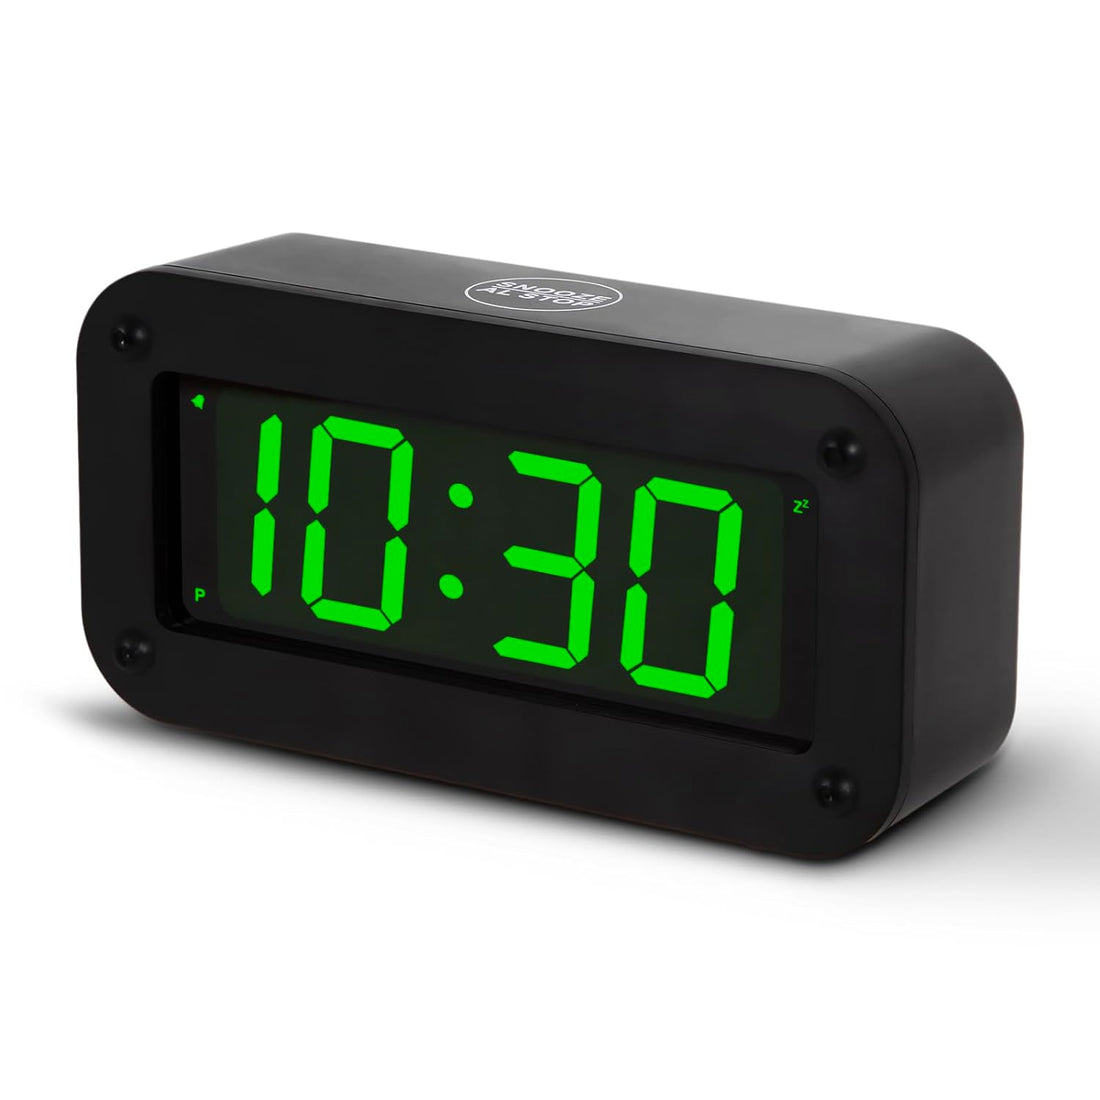 Timegyro Digital Alarm Clock Battery Operated with LED Display, Long Battery Life for 12 Months, Black Case with Green Digits